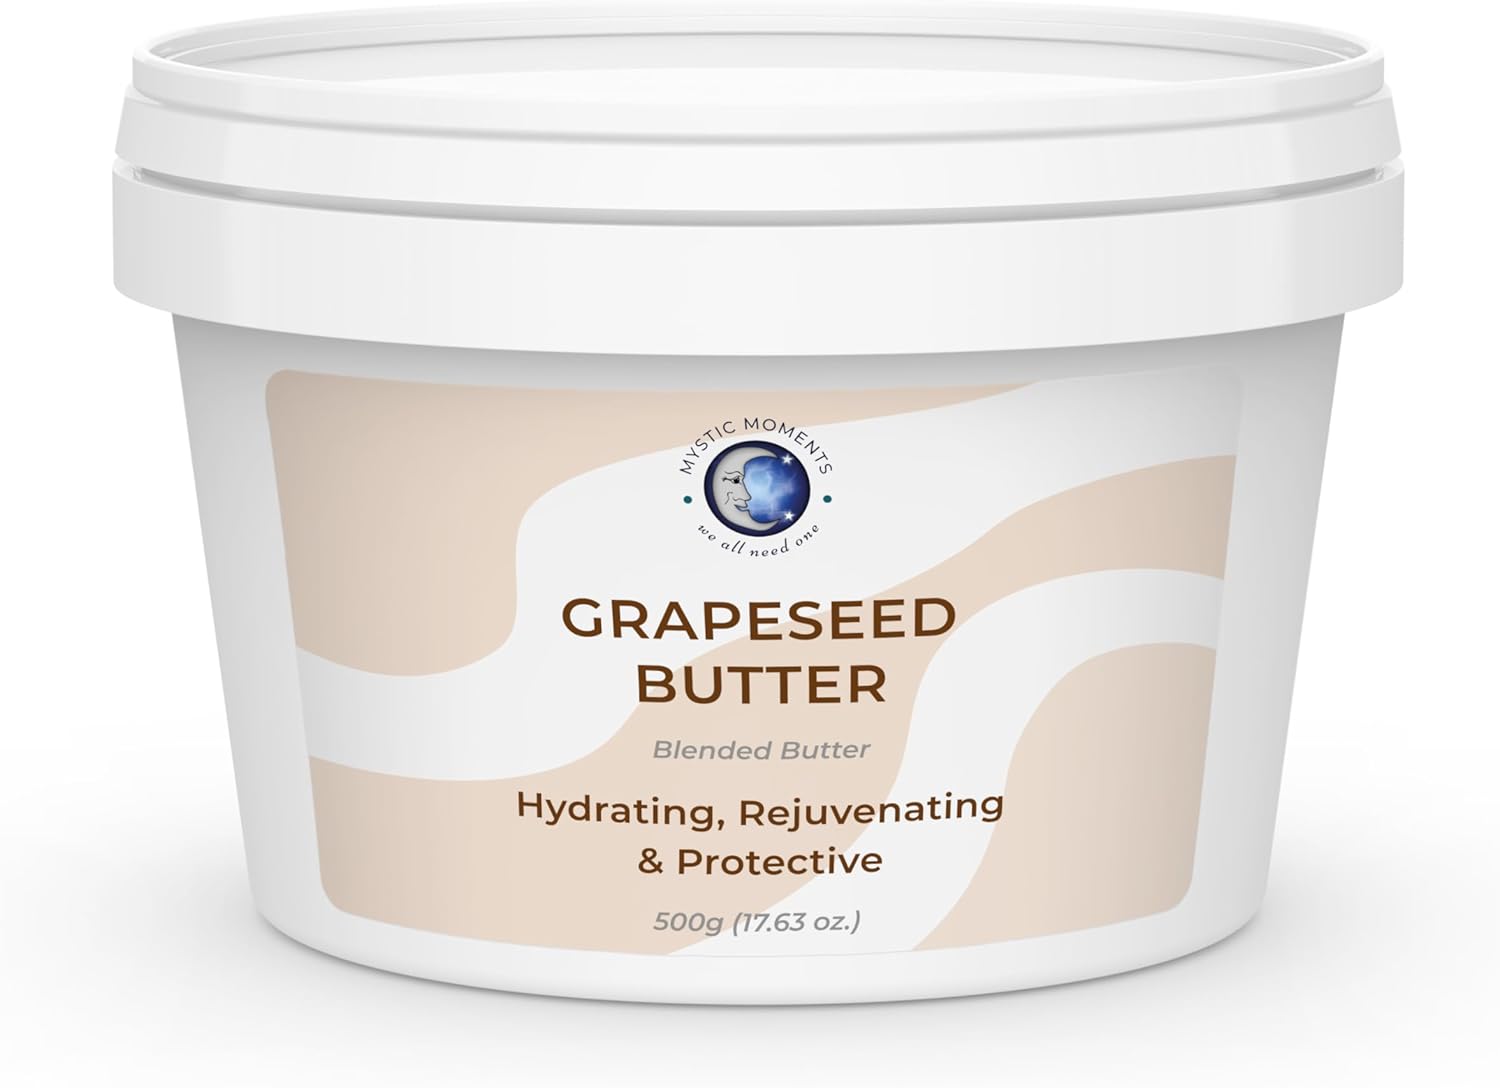 Mystic Moments Grapeseed Blended Butter-500g, 500g